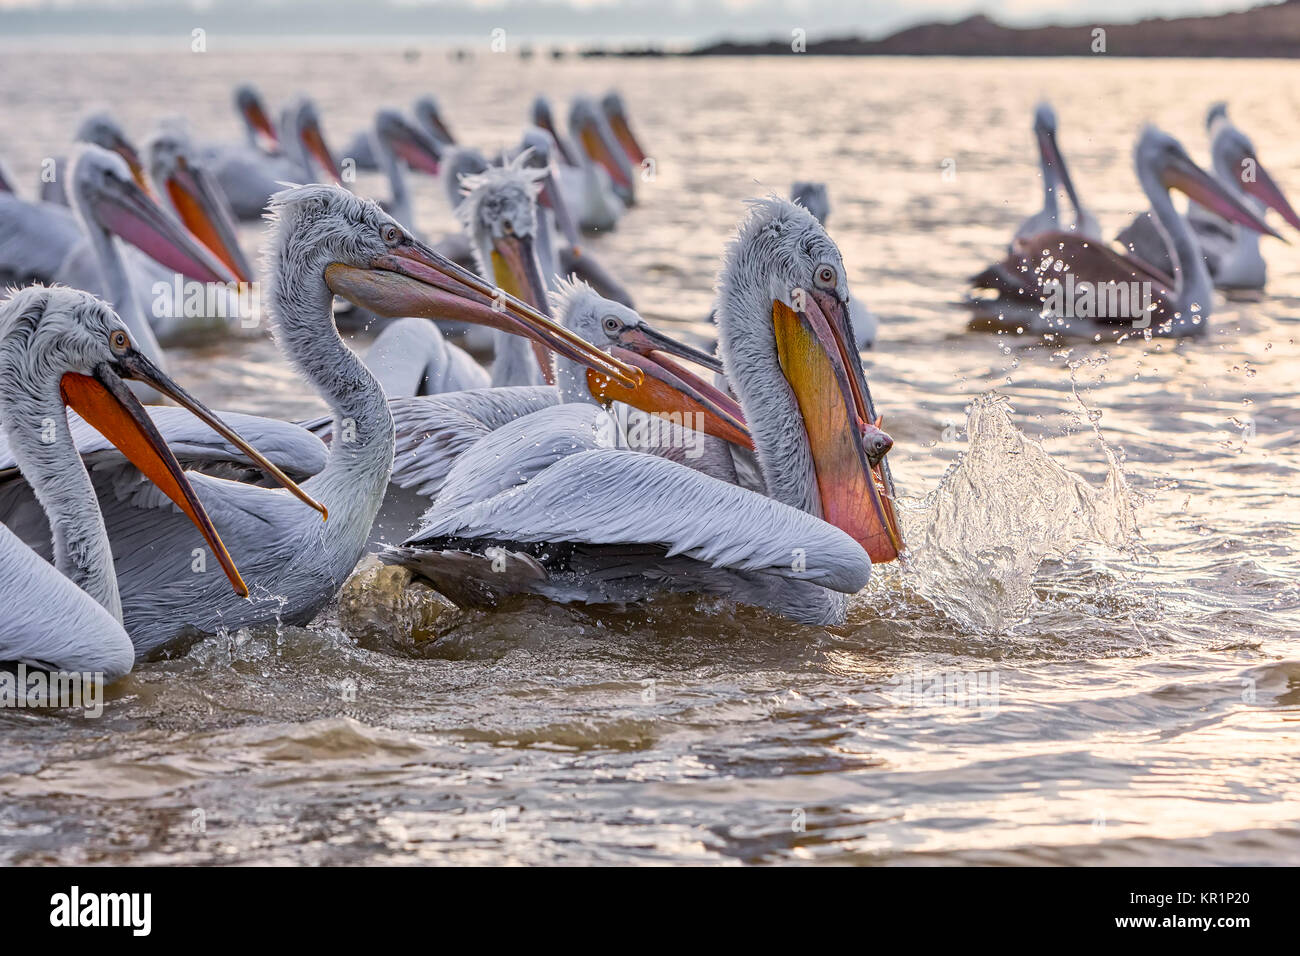 pelican "Dalmatian" opens his mouth and catches the fish that a fisherman threw at the lake Kerkini, Greece. The fishermen of the area feed the pelica Stock Photo